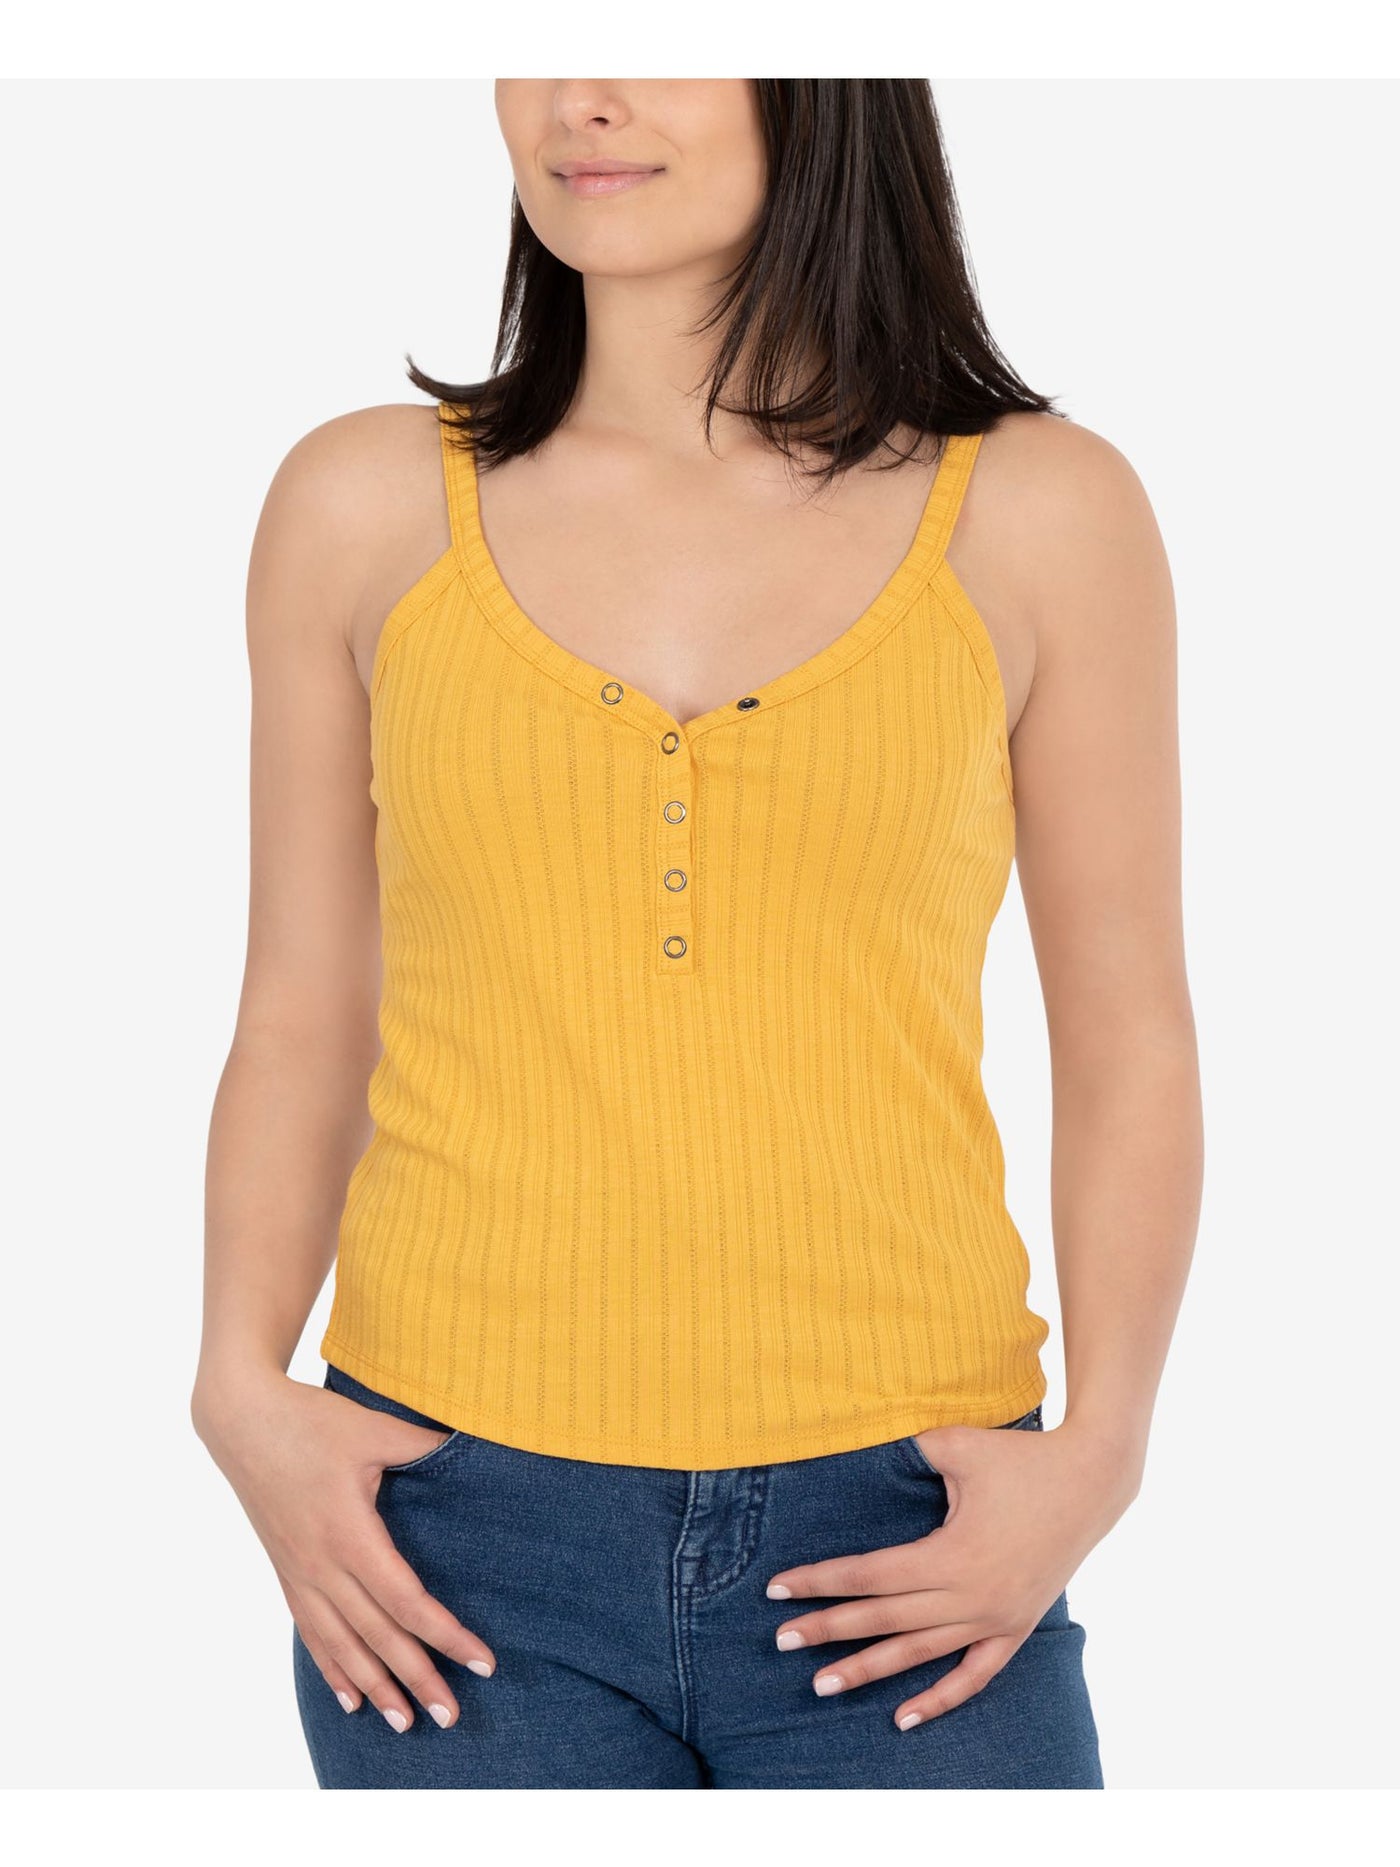 HIPPIE ROSE Womens Yellow Textured 5 Snap Button Placket Scoop Back Spaghetti Strap V Neck Tank Top Juniors XS